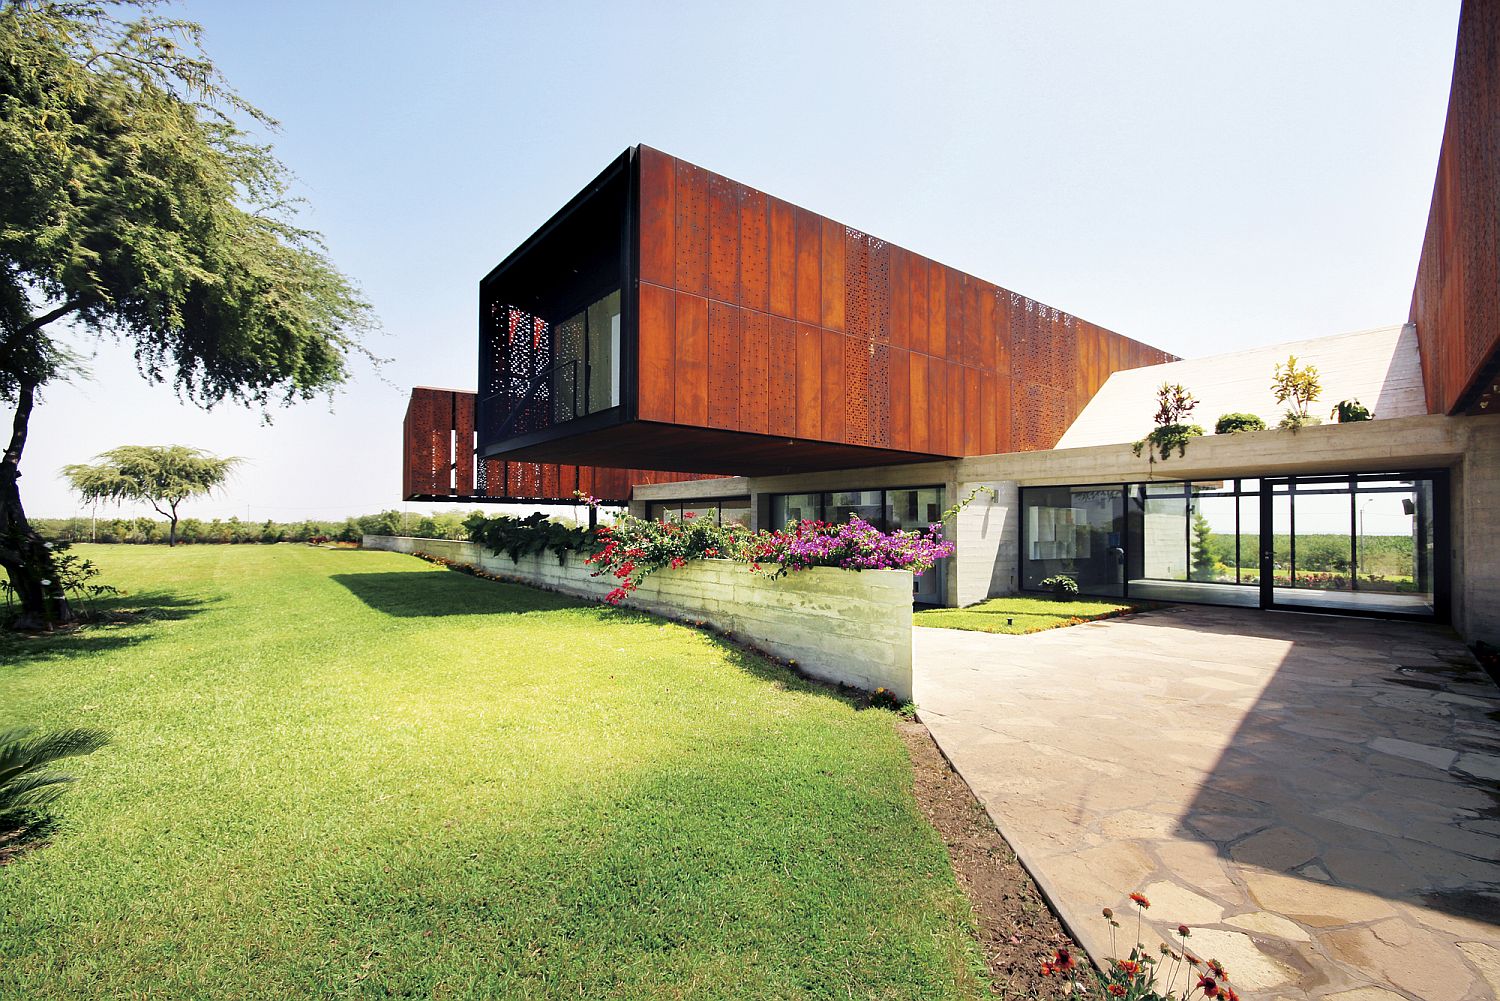 House N: Cantilevered Modern Holiday Home on a Peruvian Horse Ranch